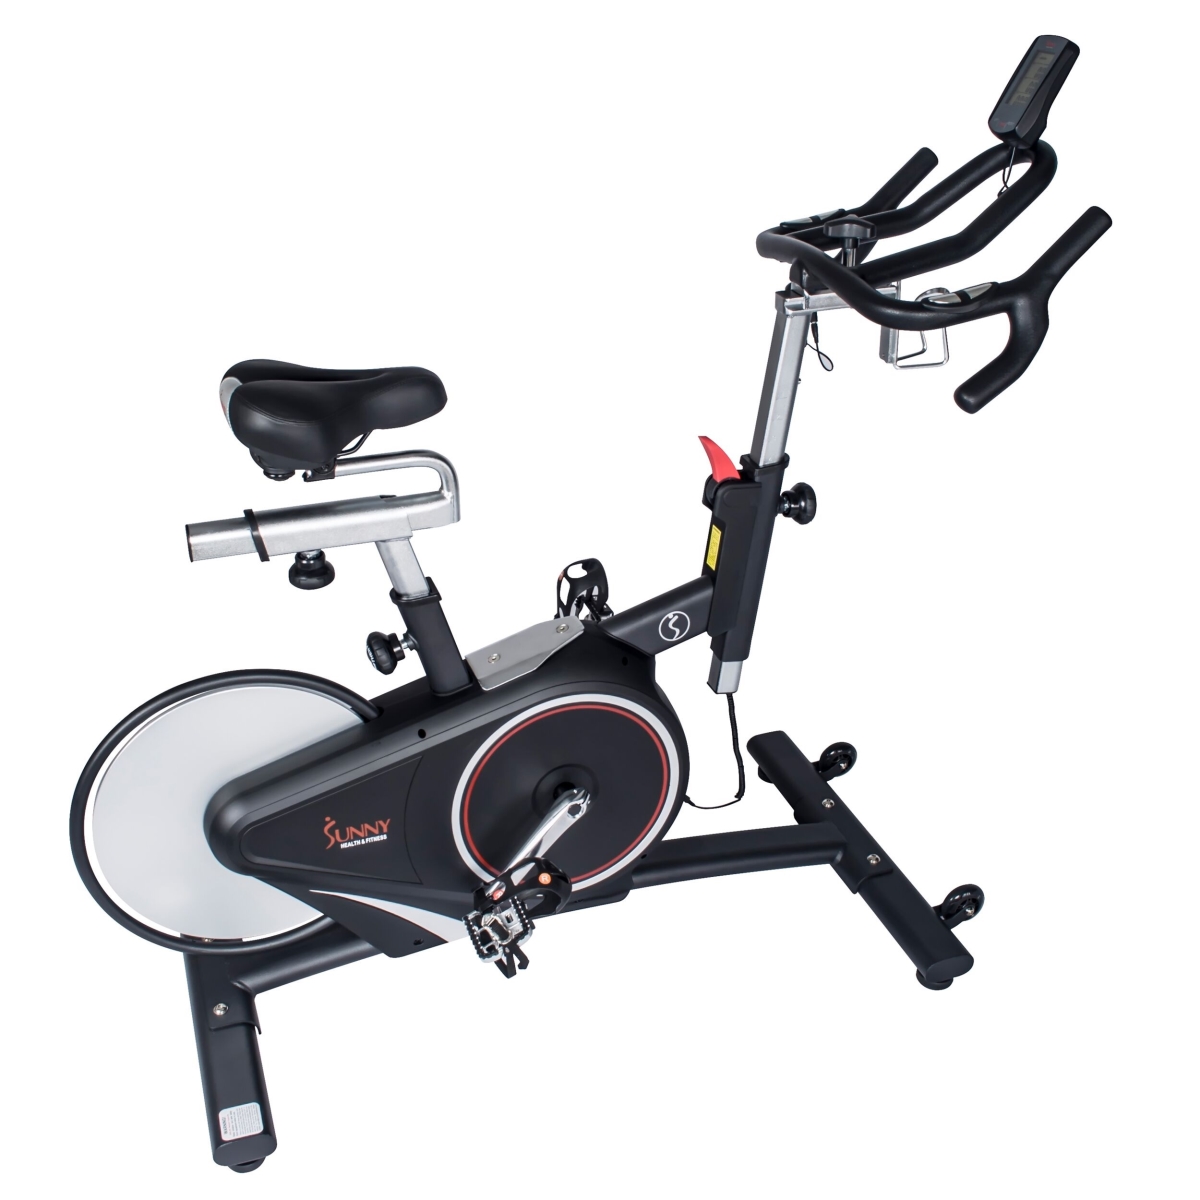 Sunny Health & Fitness Magnetic Belt Rear Drive Indoor Cycling Bike with Cadence Sensor & Pulse Rate Monitor